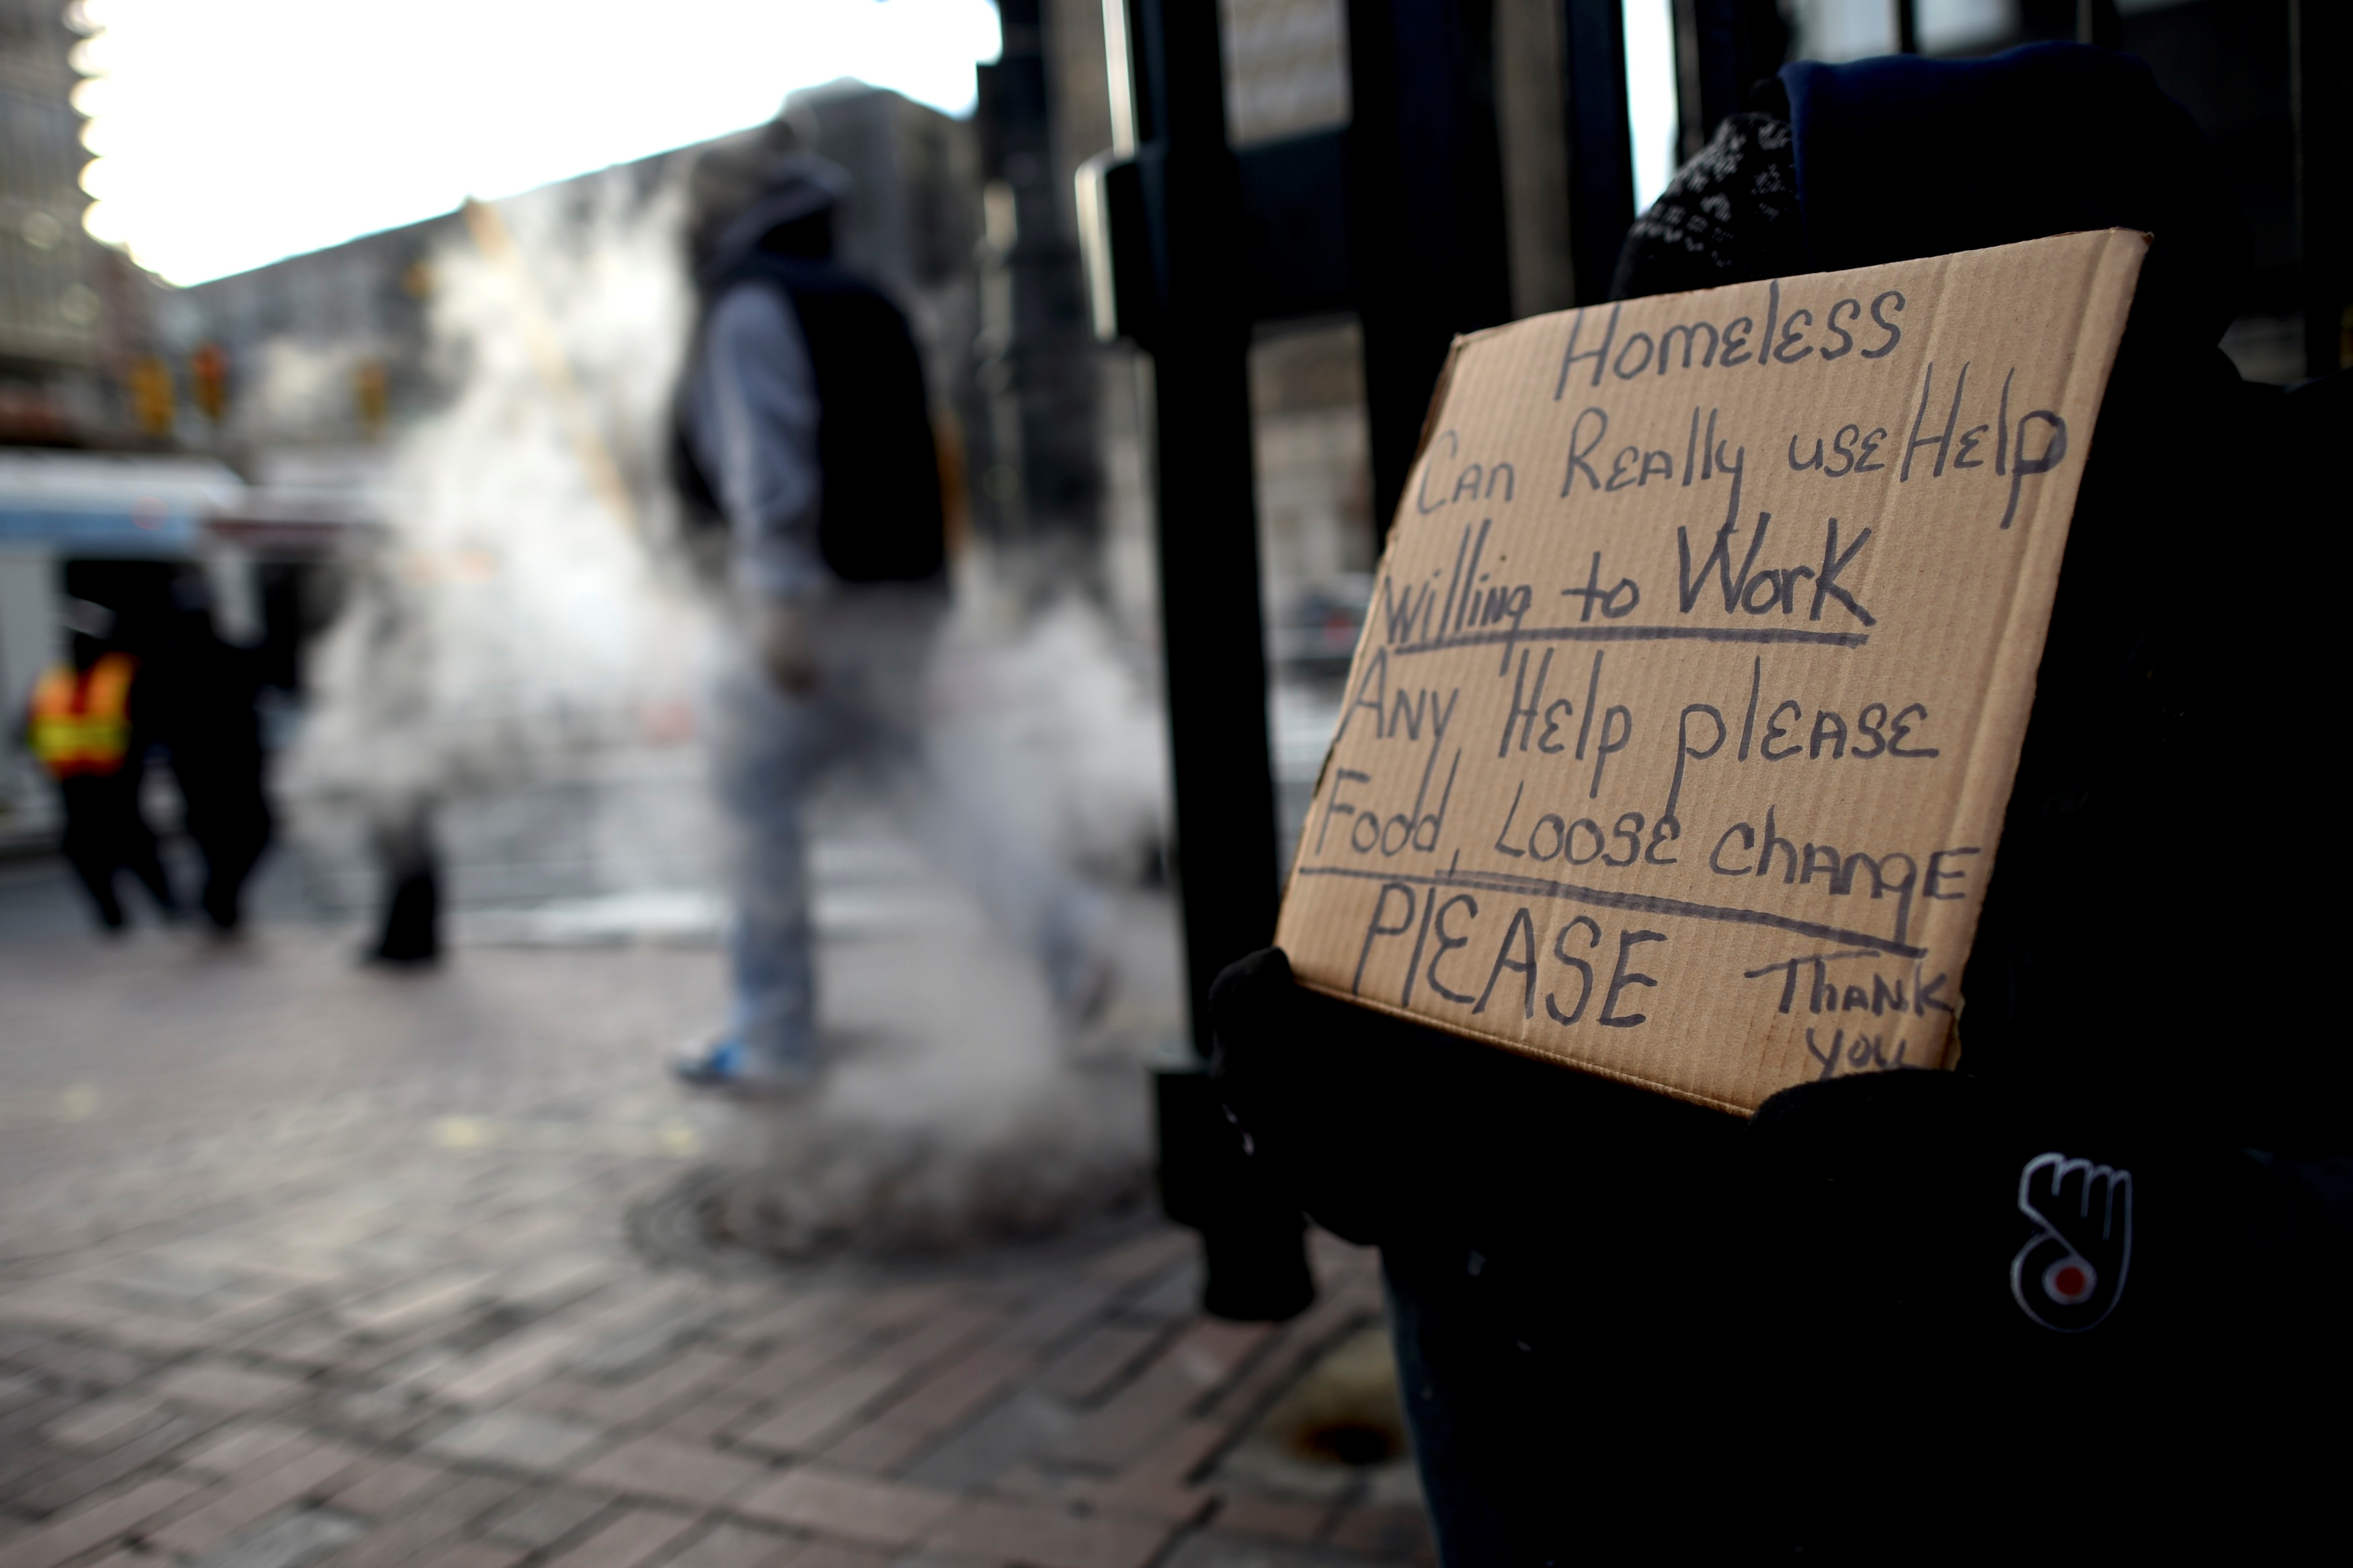 homeless shelters making money from the government